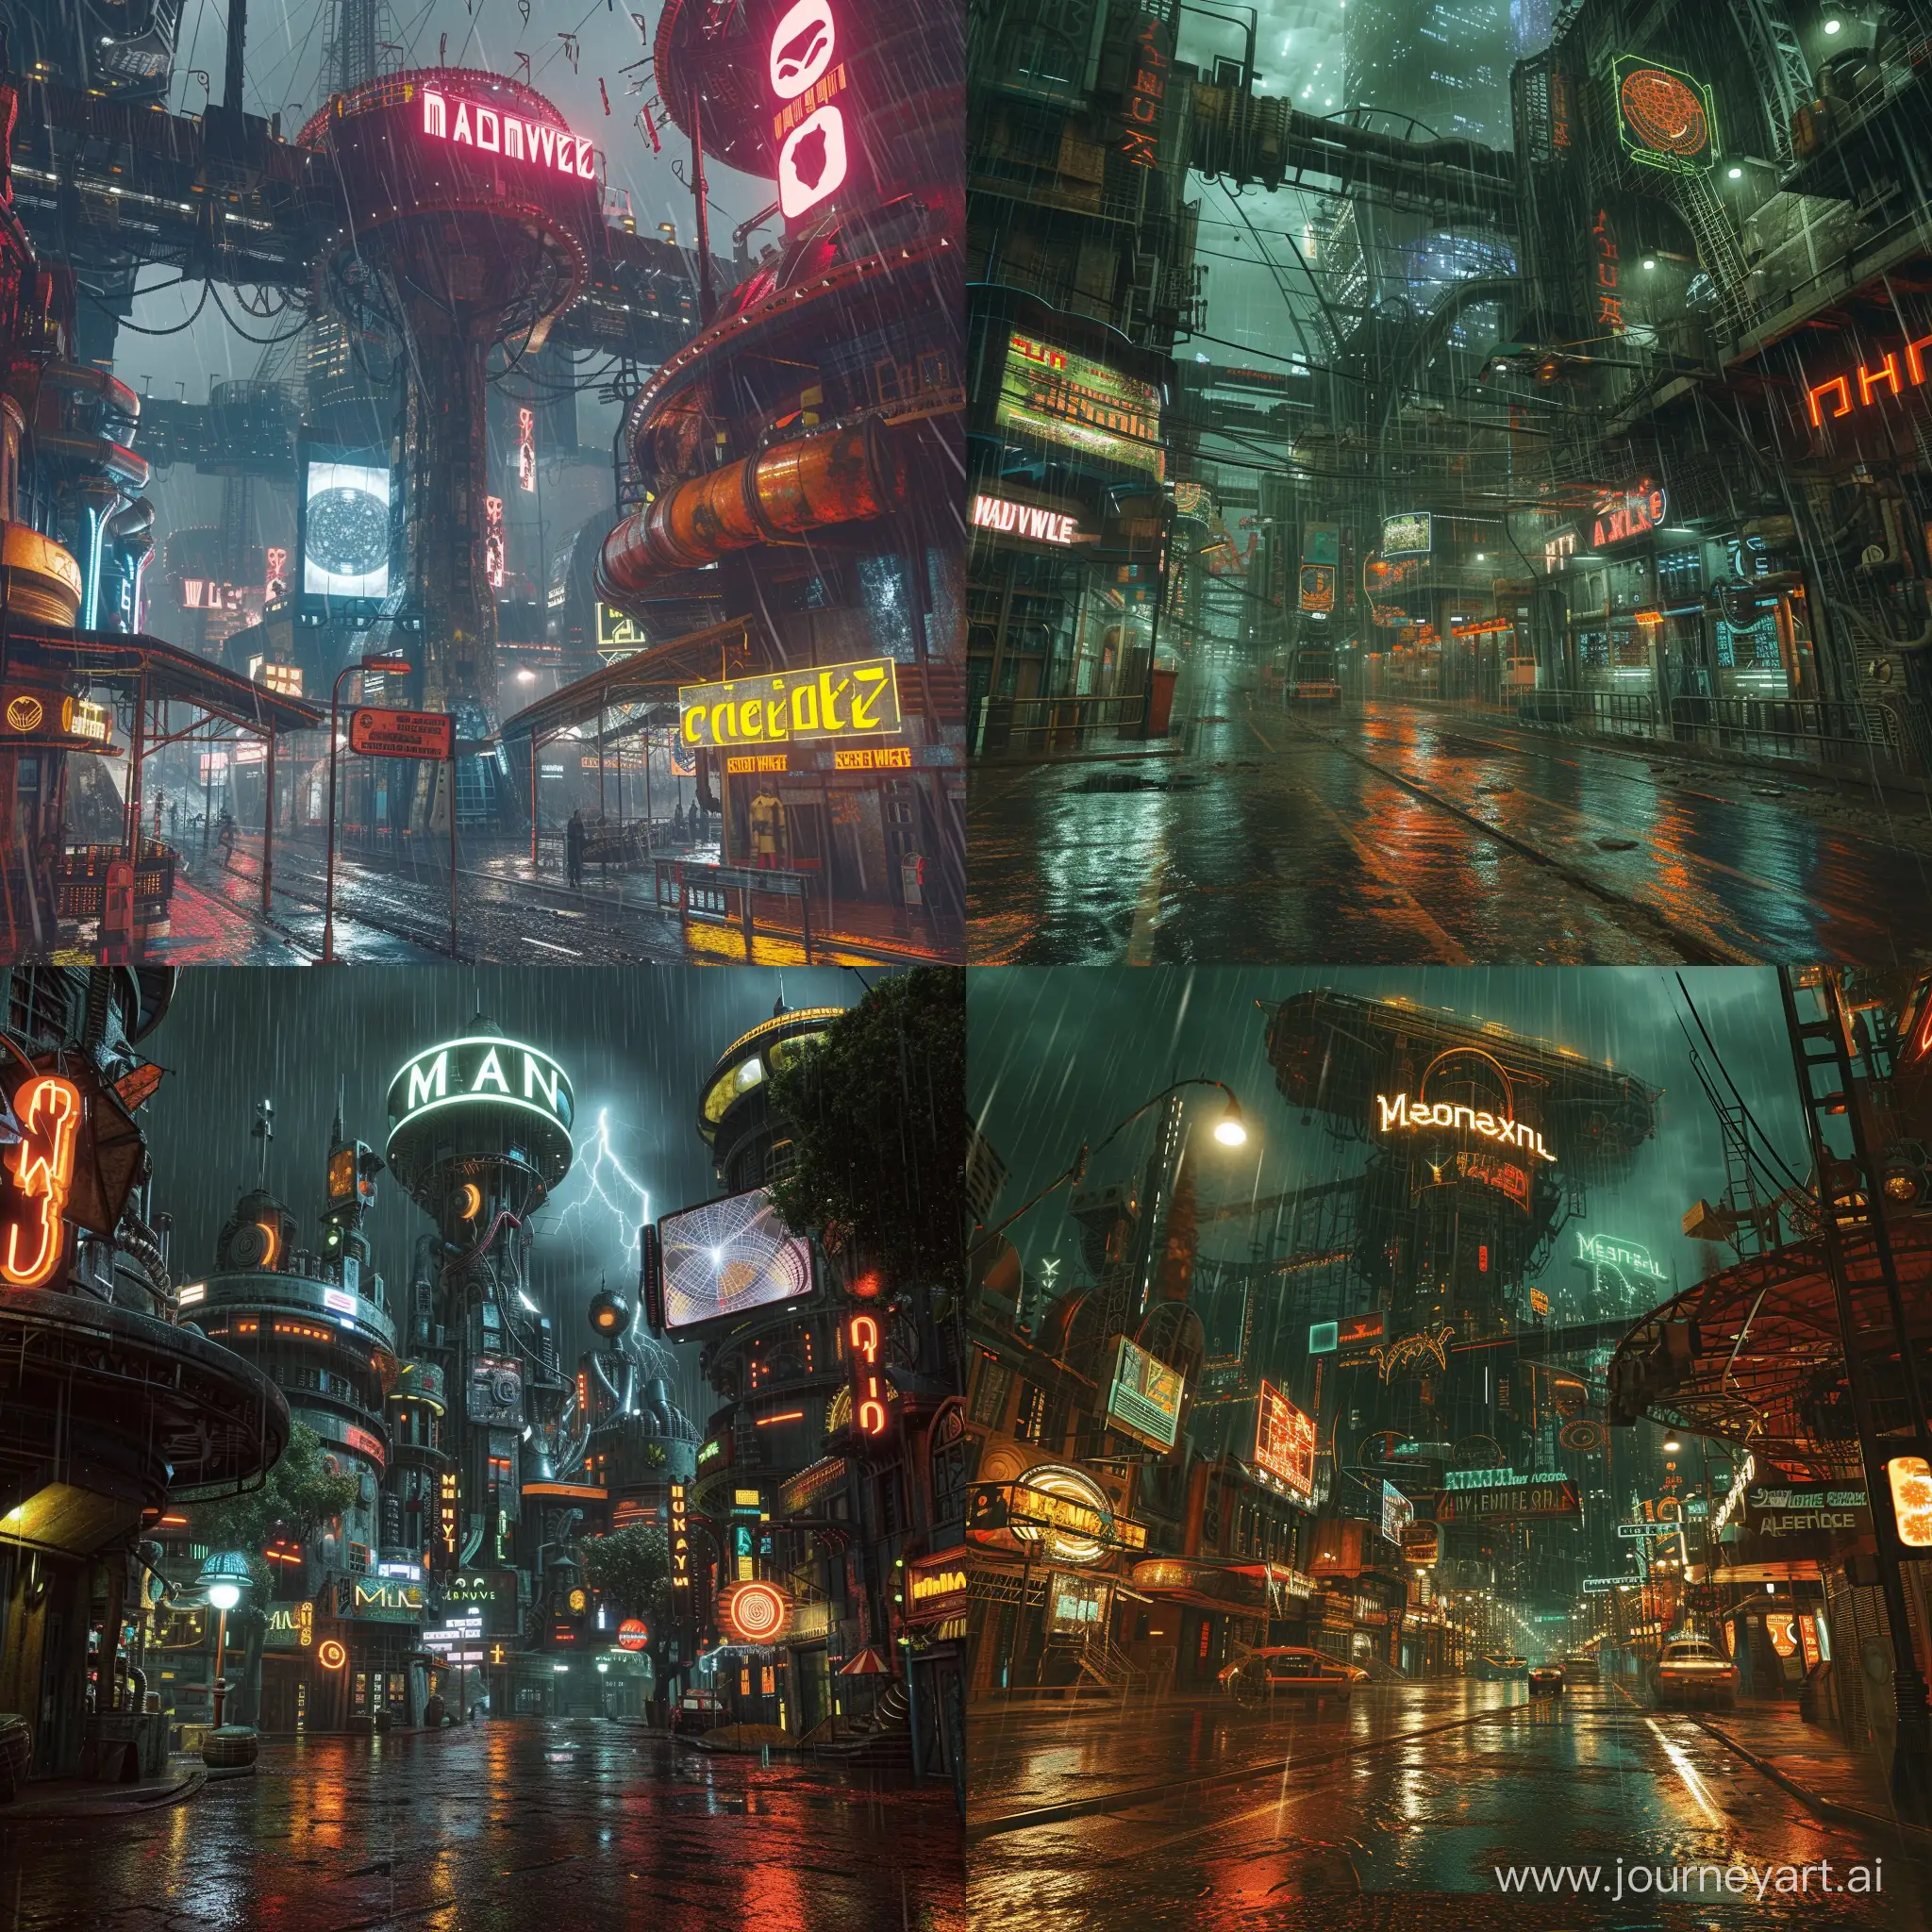 Futuristic-Alien-World-Fractal-Architecture-in-Neonlit-RainSoaked-Streets